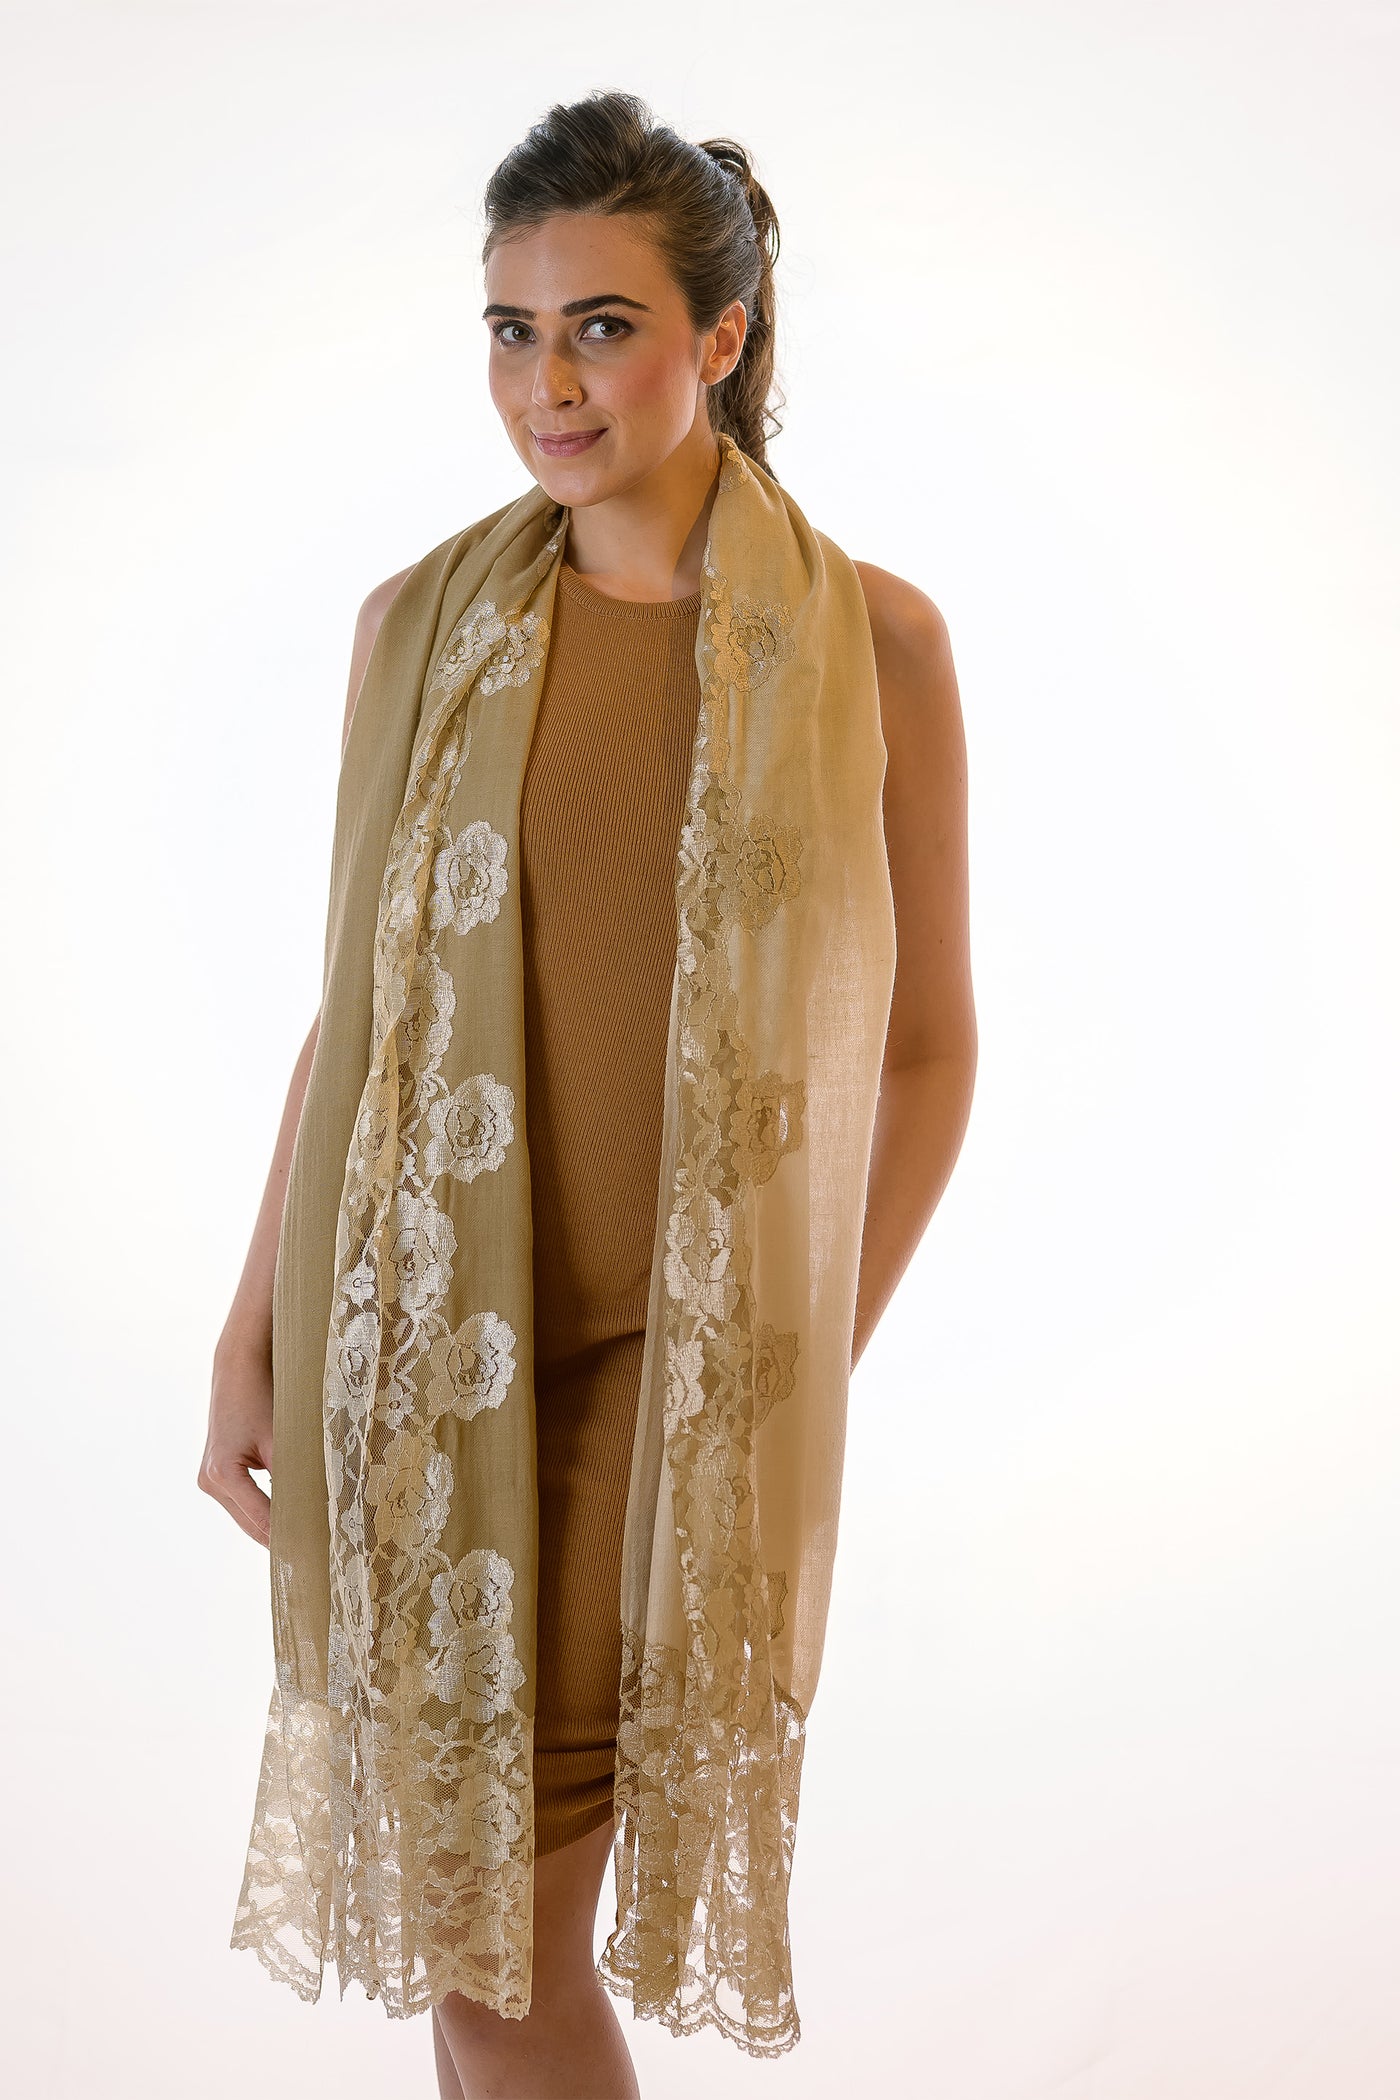 Queenmark couture Fashion Road Beige Lace fashion accessories online shopping melange singapore